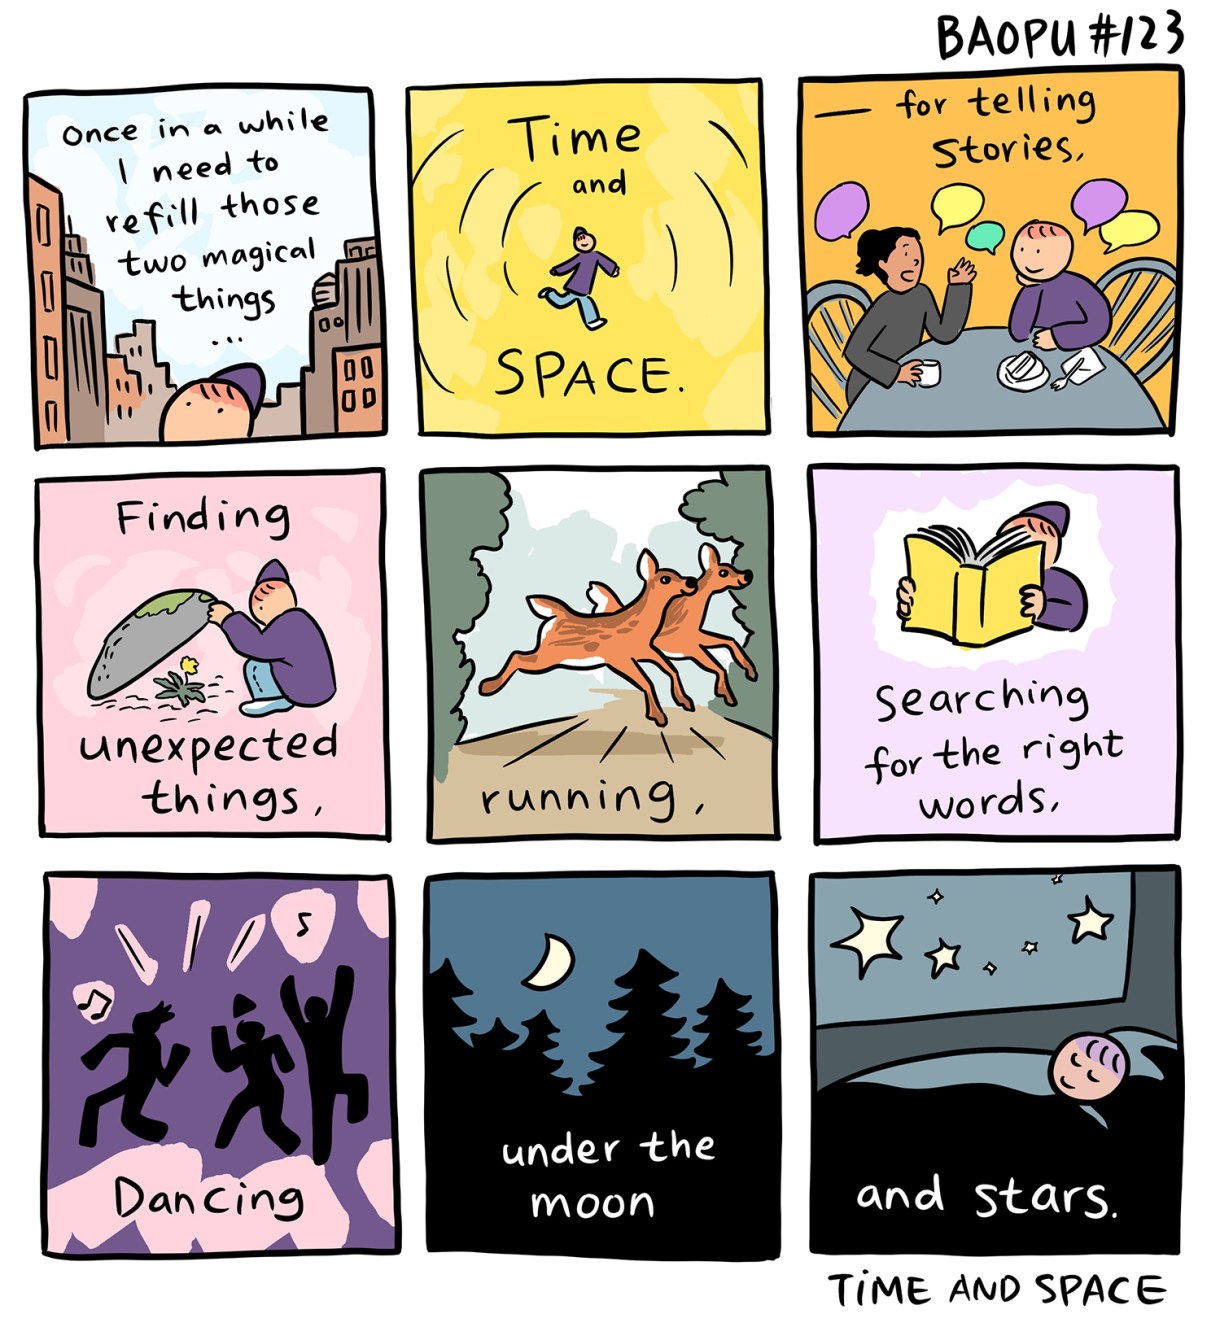 A nine panel comic is illustrating a poem. The poem reads: "Once in a while I need to refill those two magical things / Time and Space / For telling stories / Finding unexpected things / Running / Searching fo rthe right words / Dancing / Under the Moon / And stars.